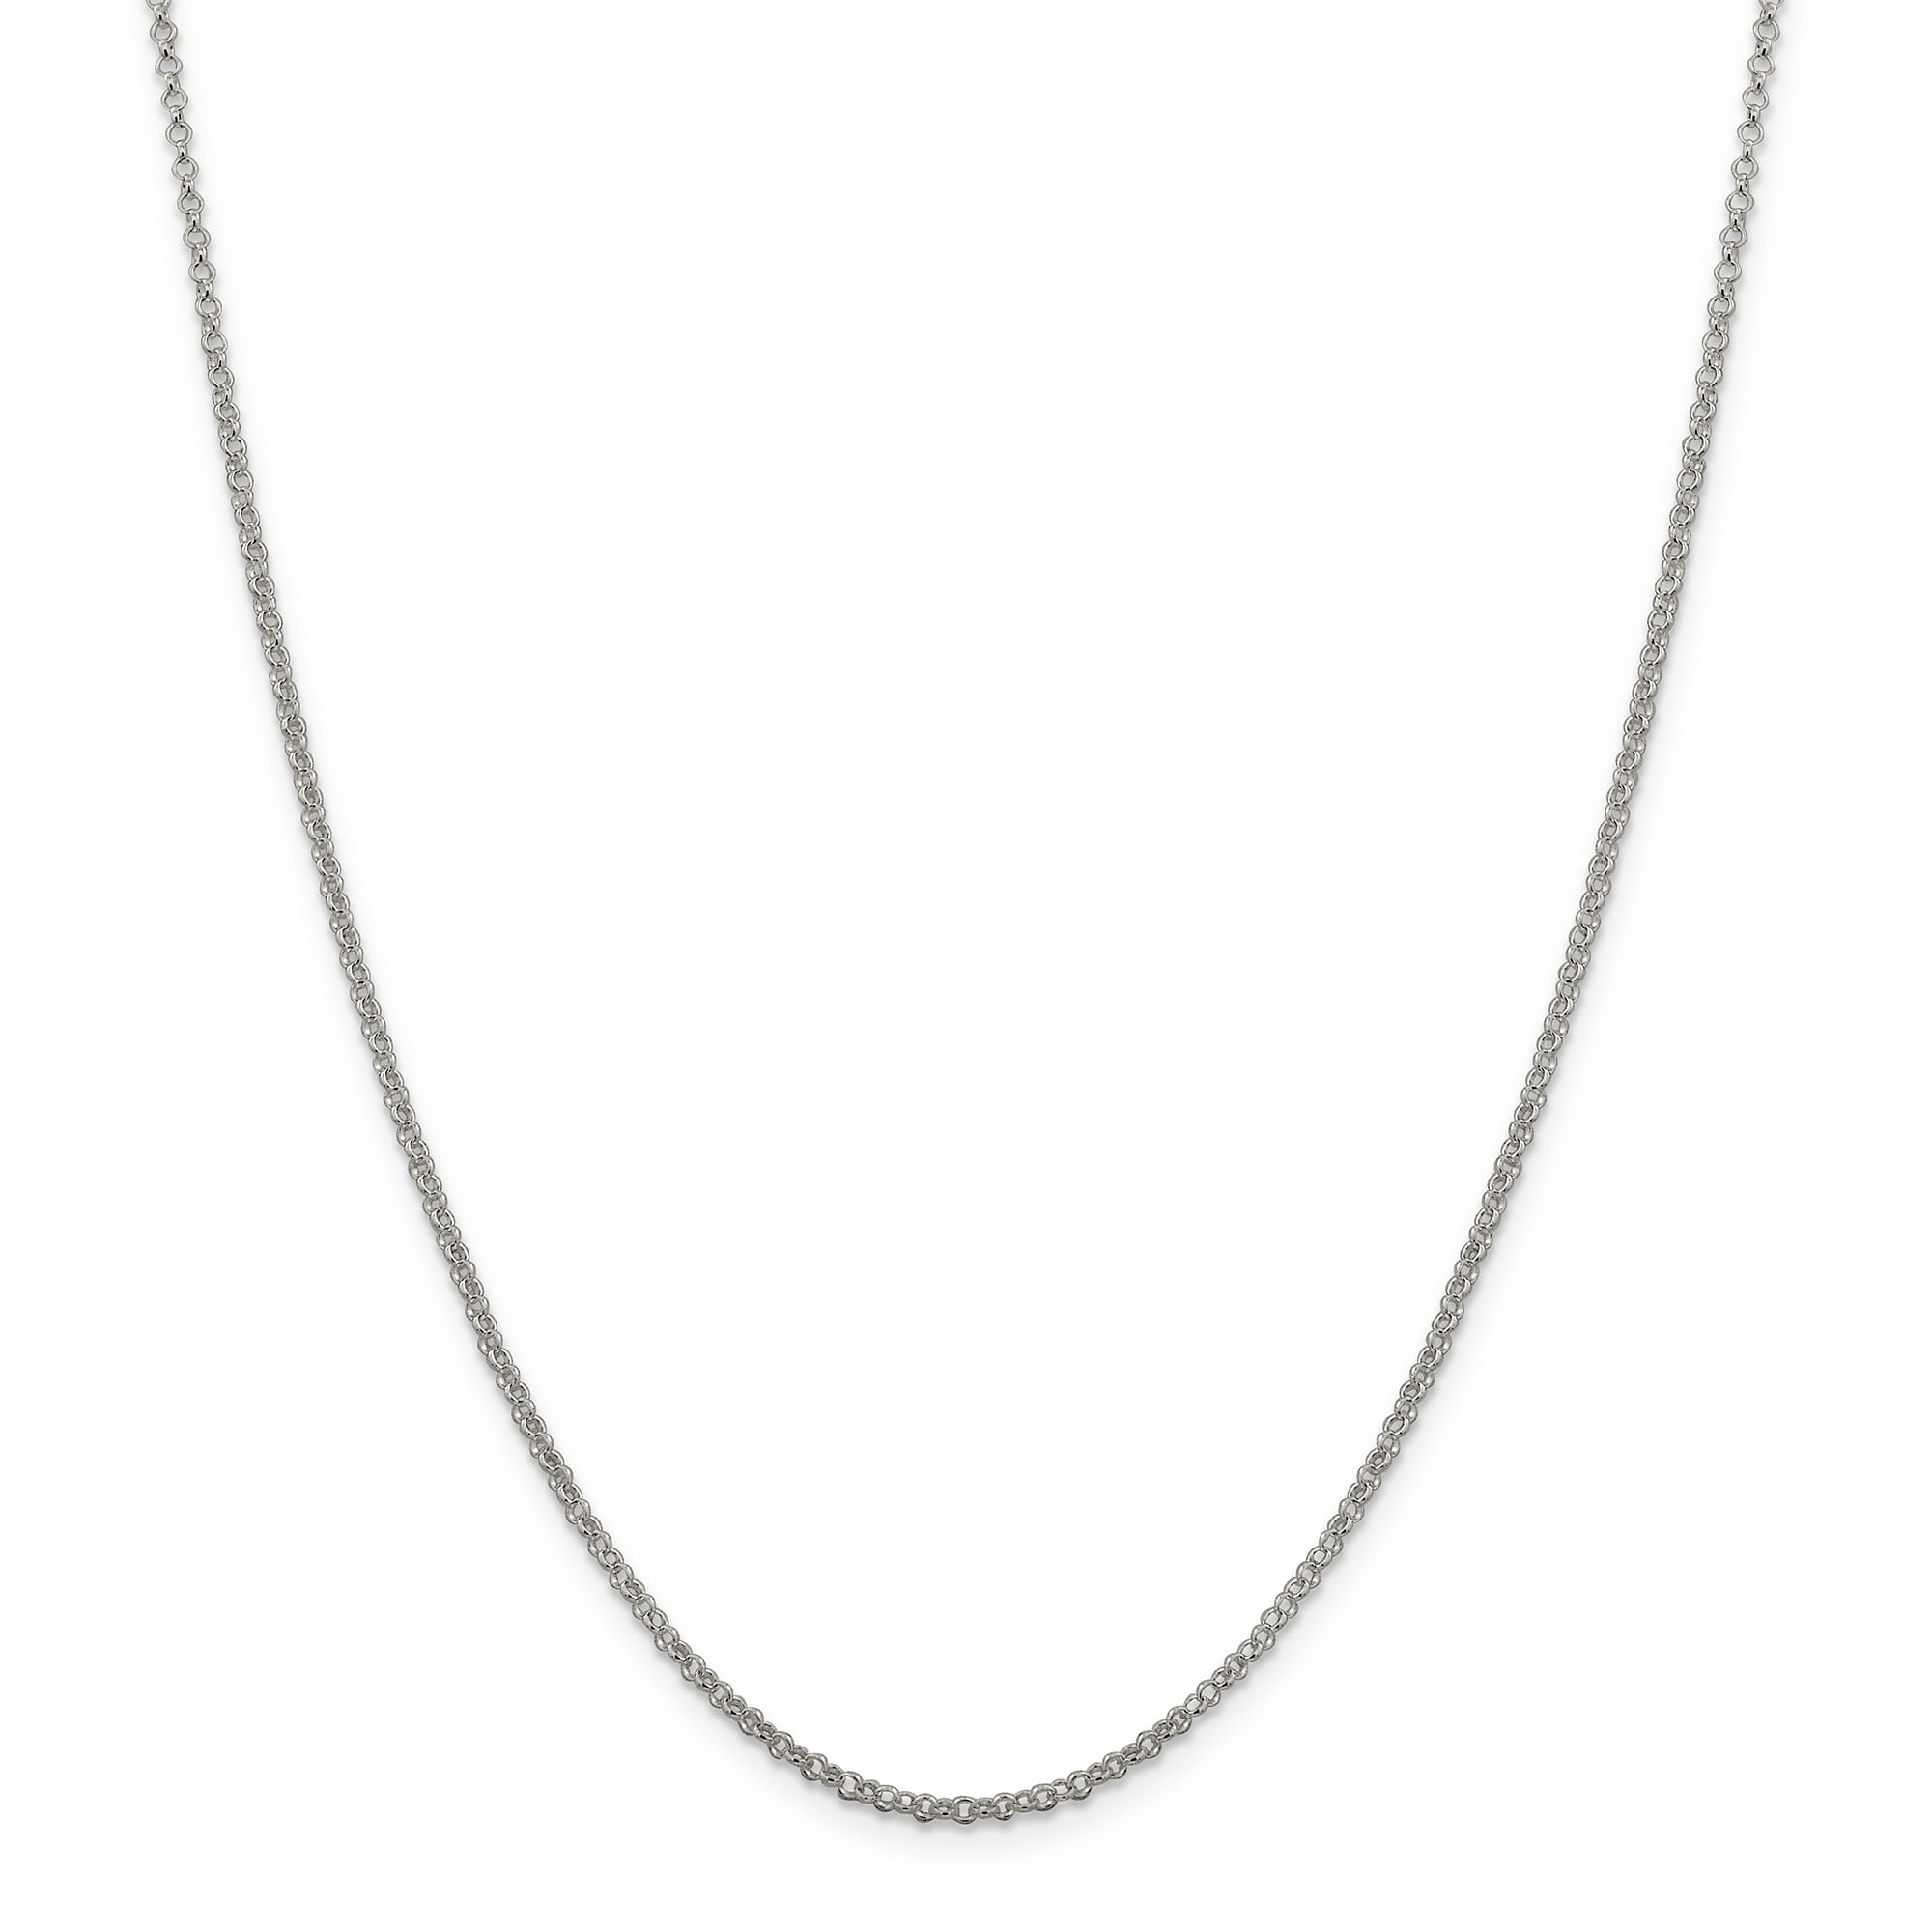 1.1mm Sterling Silver Rhodium Plated Cable Chain